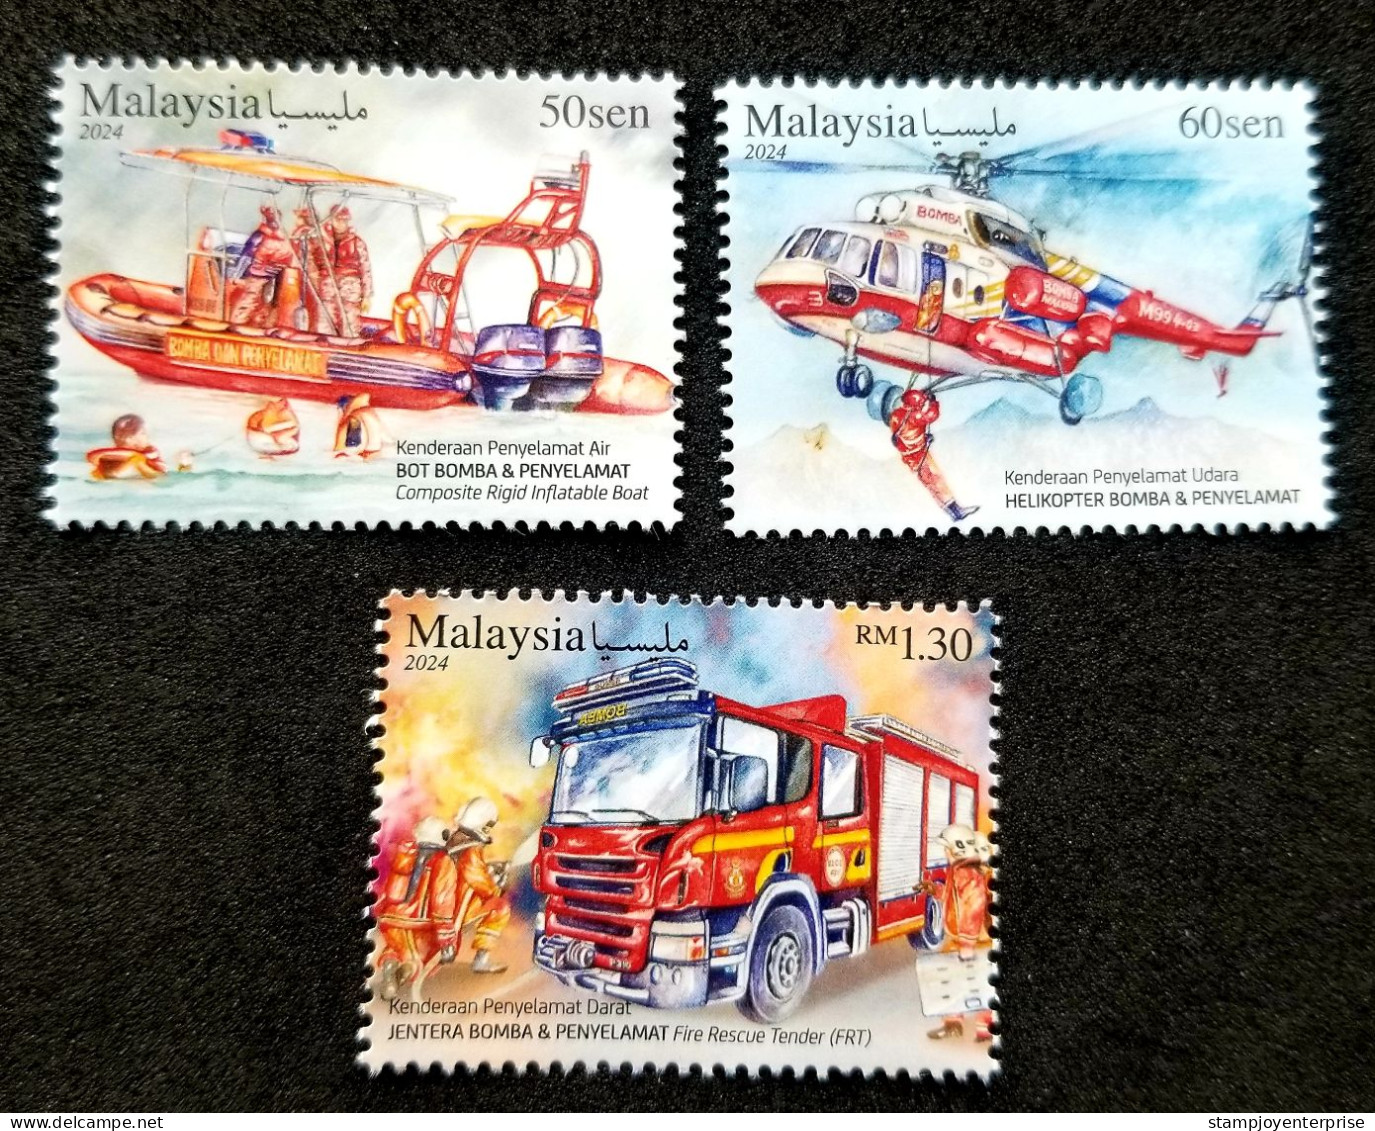 Malaysia Rescue Vehicle 2024 Helicopter Fire Engine Brigade Boat Ship Transport Firefighting Fireman (sheetlet) MNH - Malaysia (1964-...)